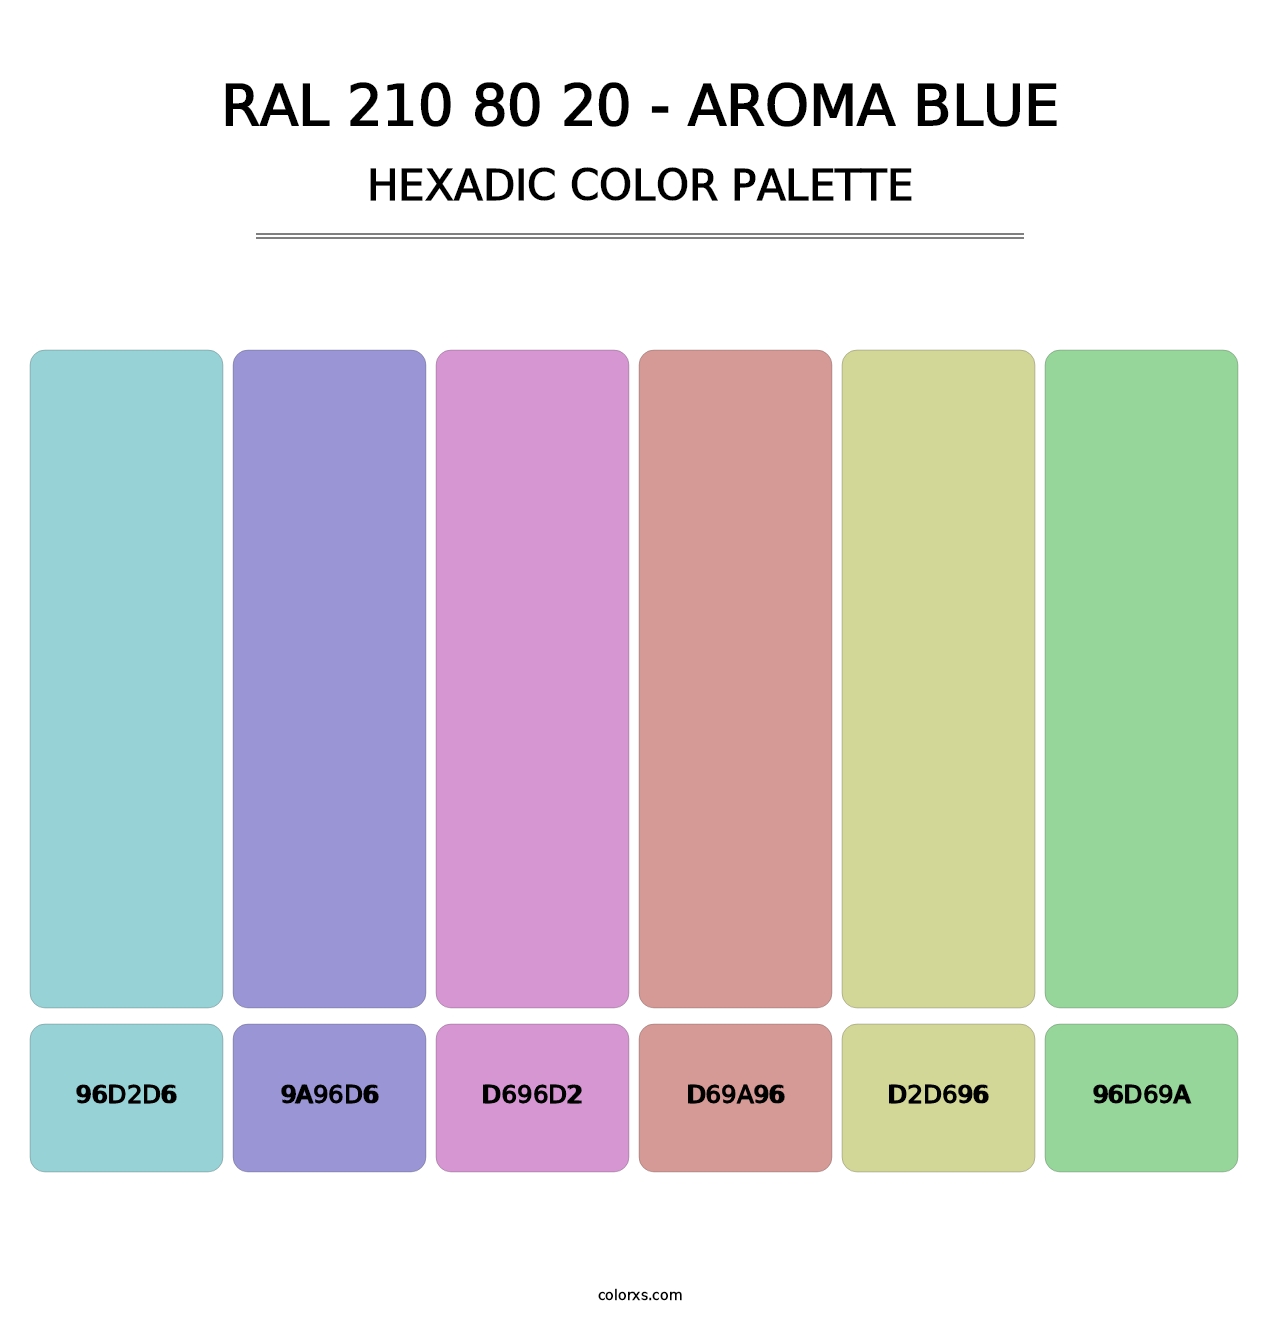 RAL 210 80 20 - Aroma Blue - Hexadic Color Palette